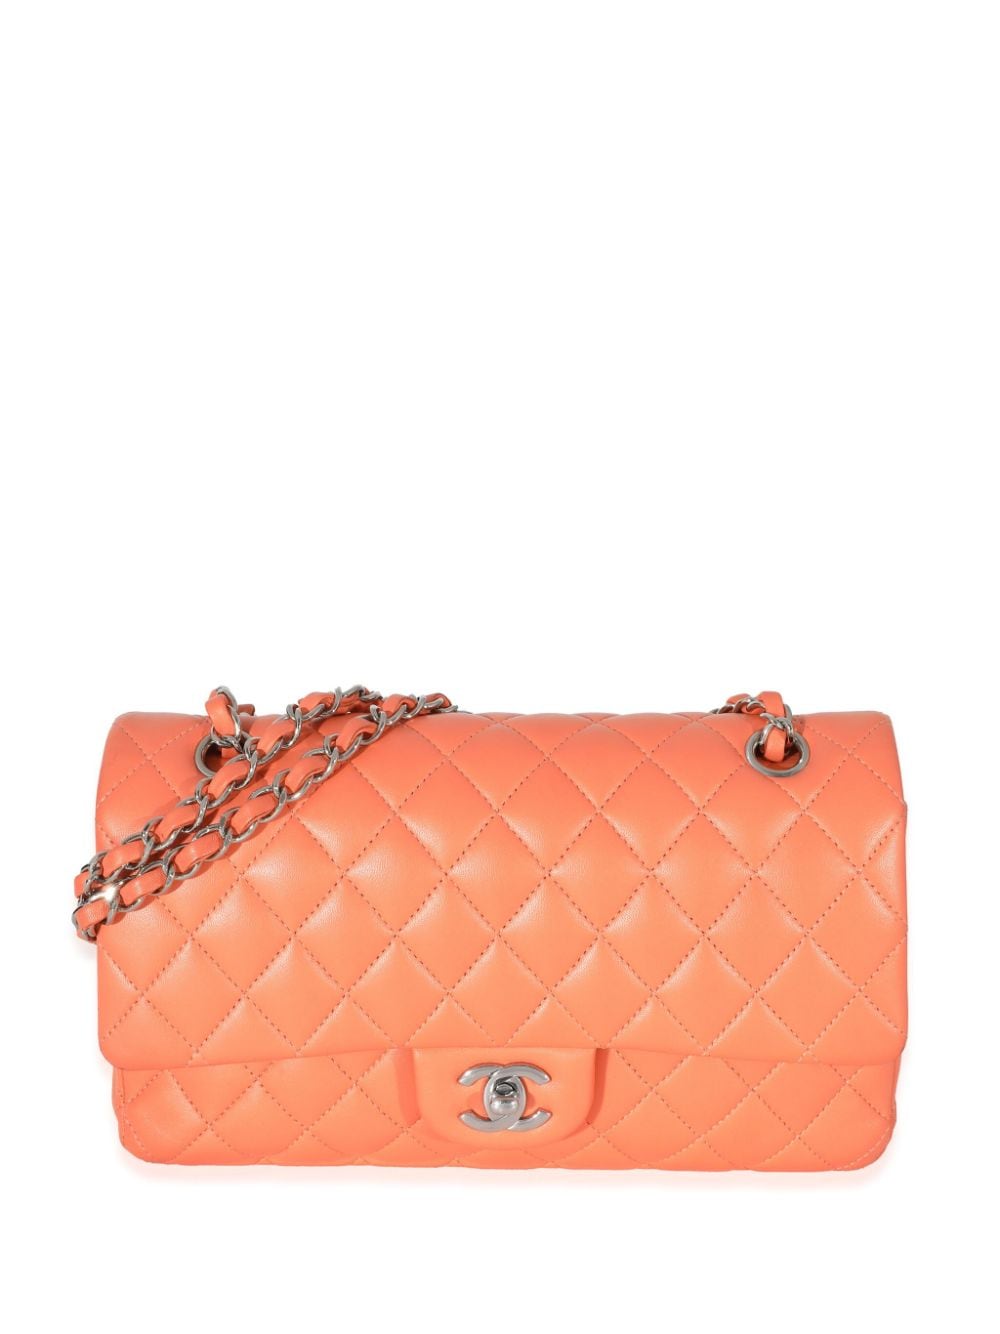 CHANEL Pre-Owned 2021 Mittelgroße Classic Flap Schultertasche - Orange von CHANEL Pre-Owned